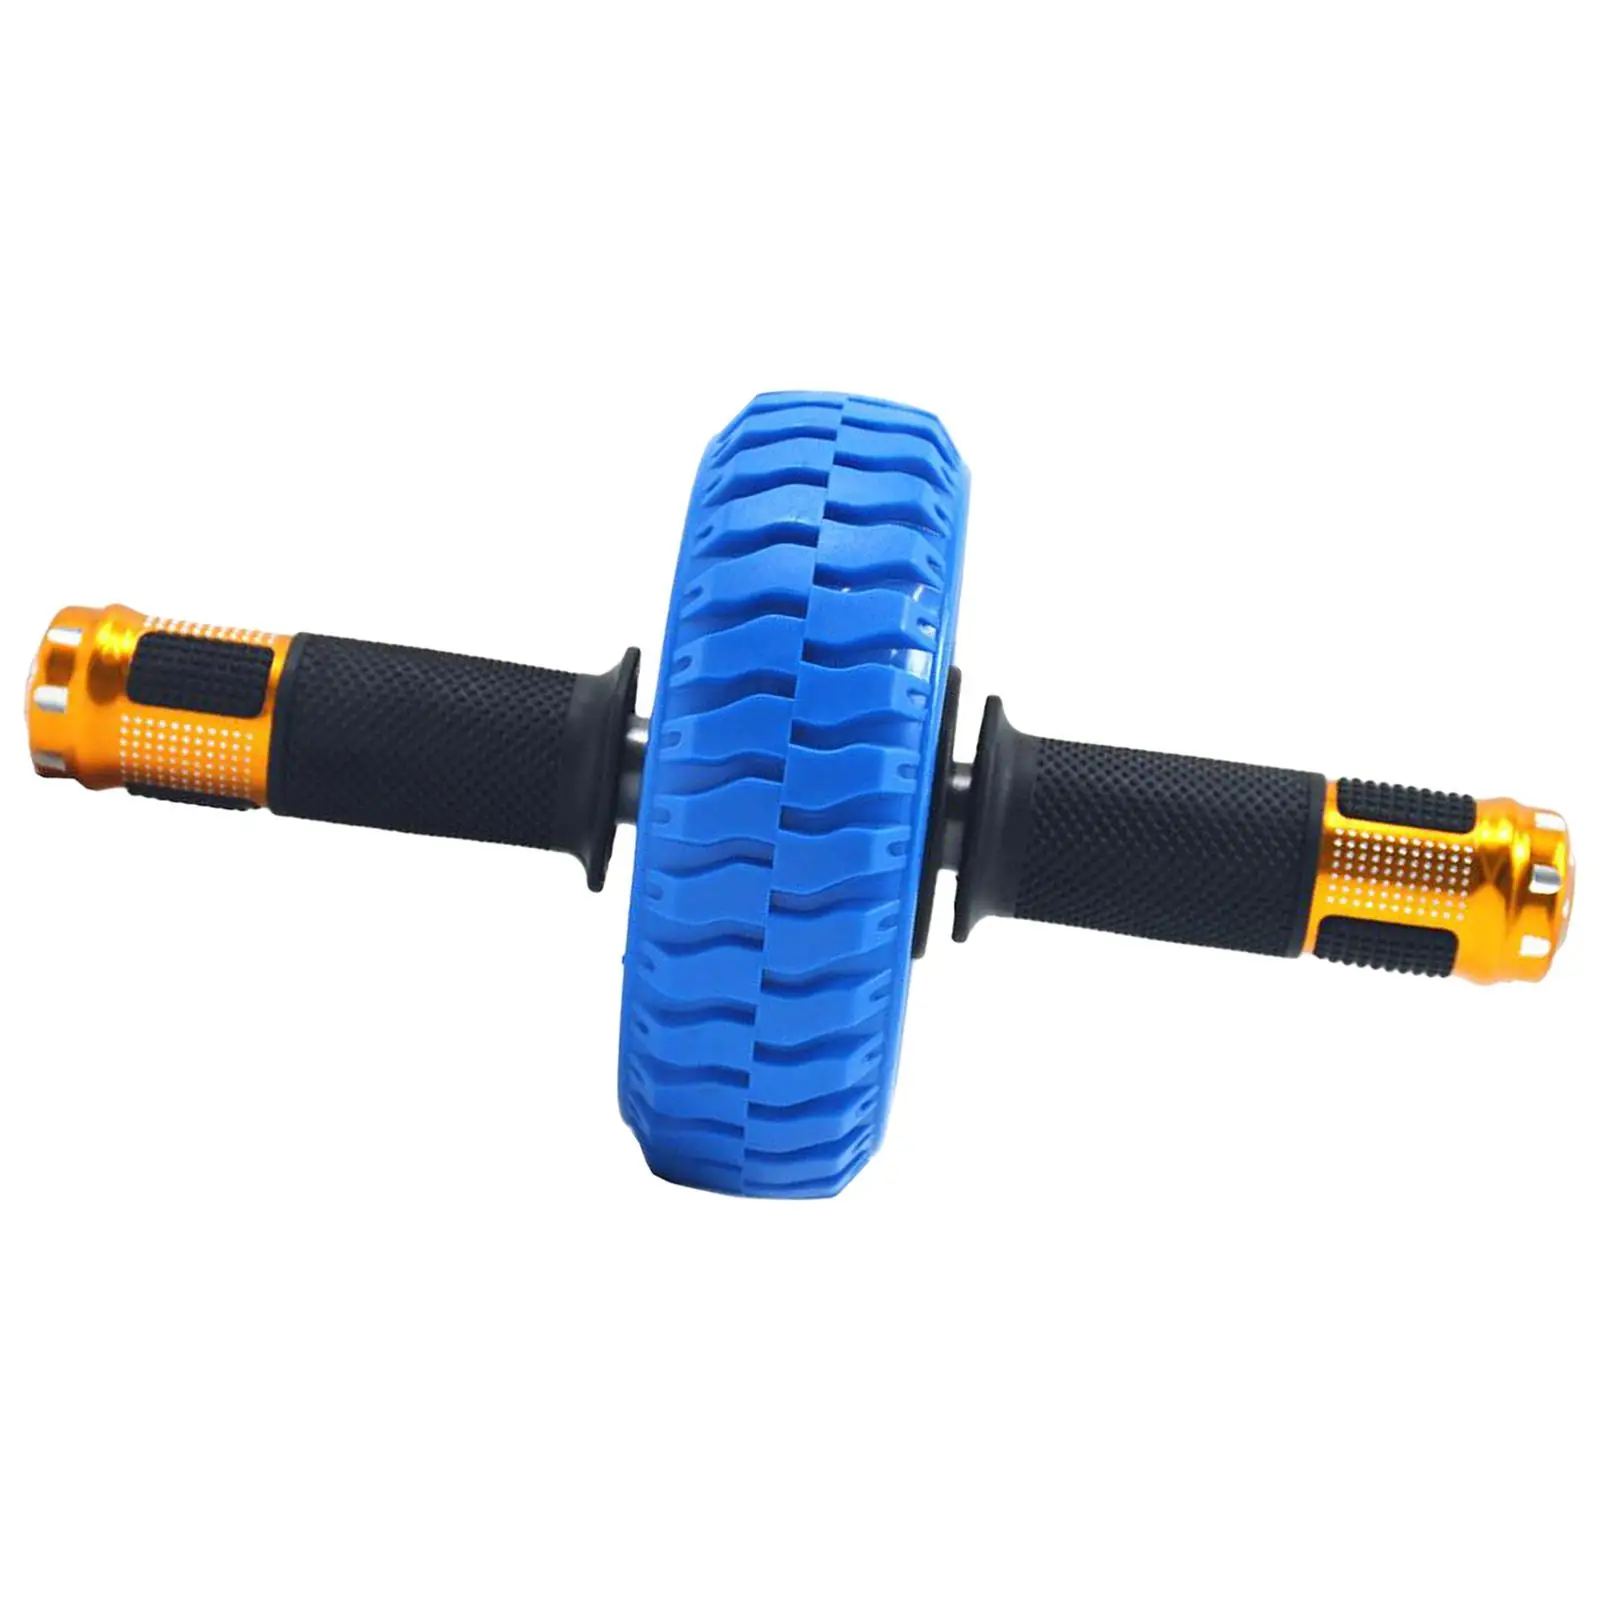 Exerciser Training Gear Roller Home Gym Abdominal Muscle Toner